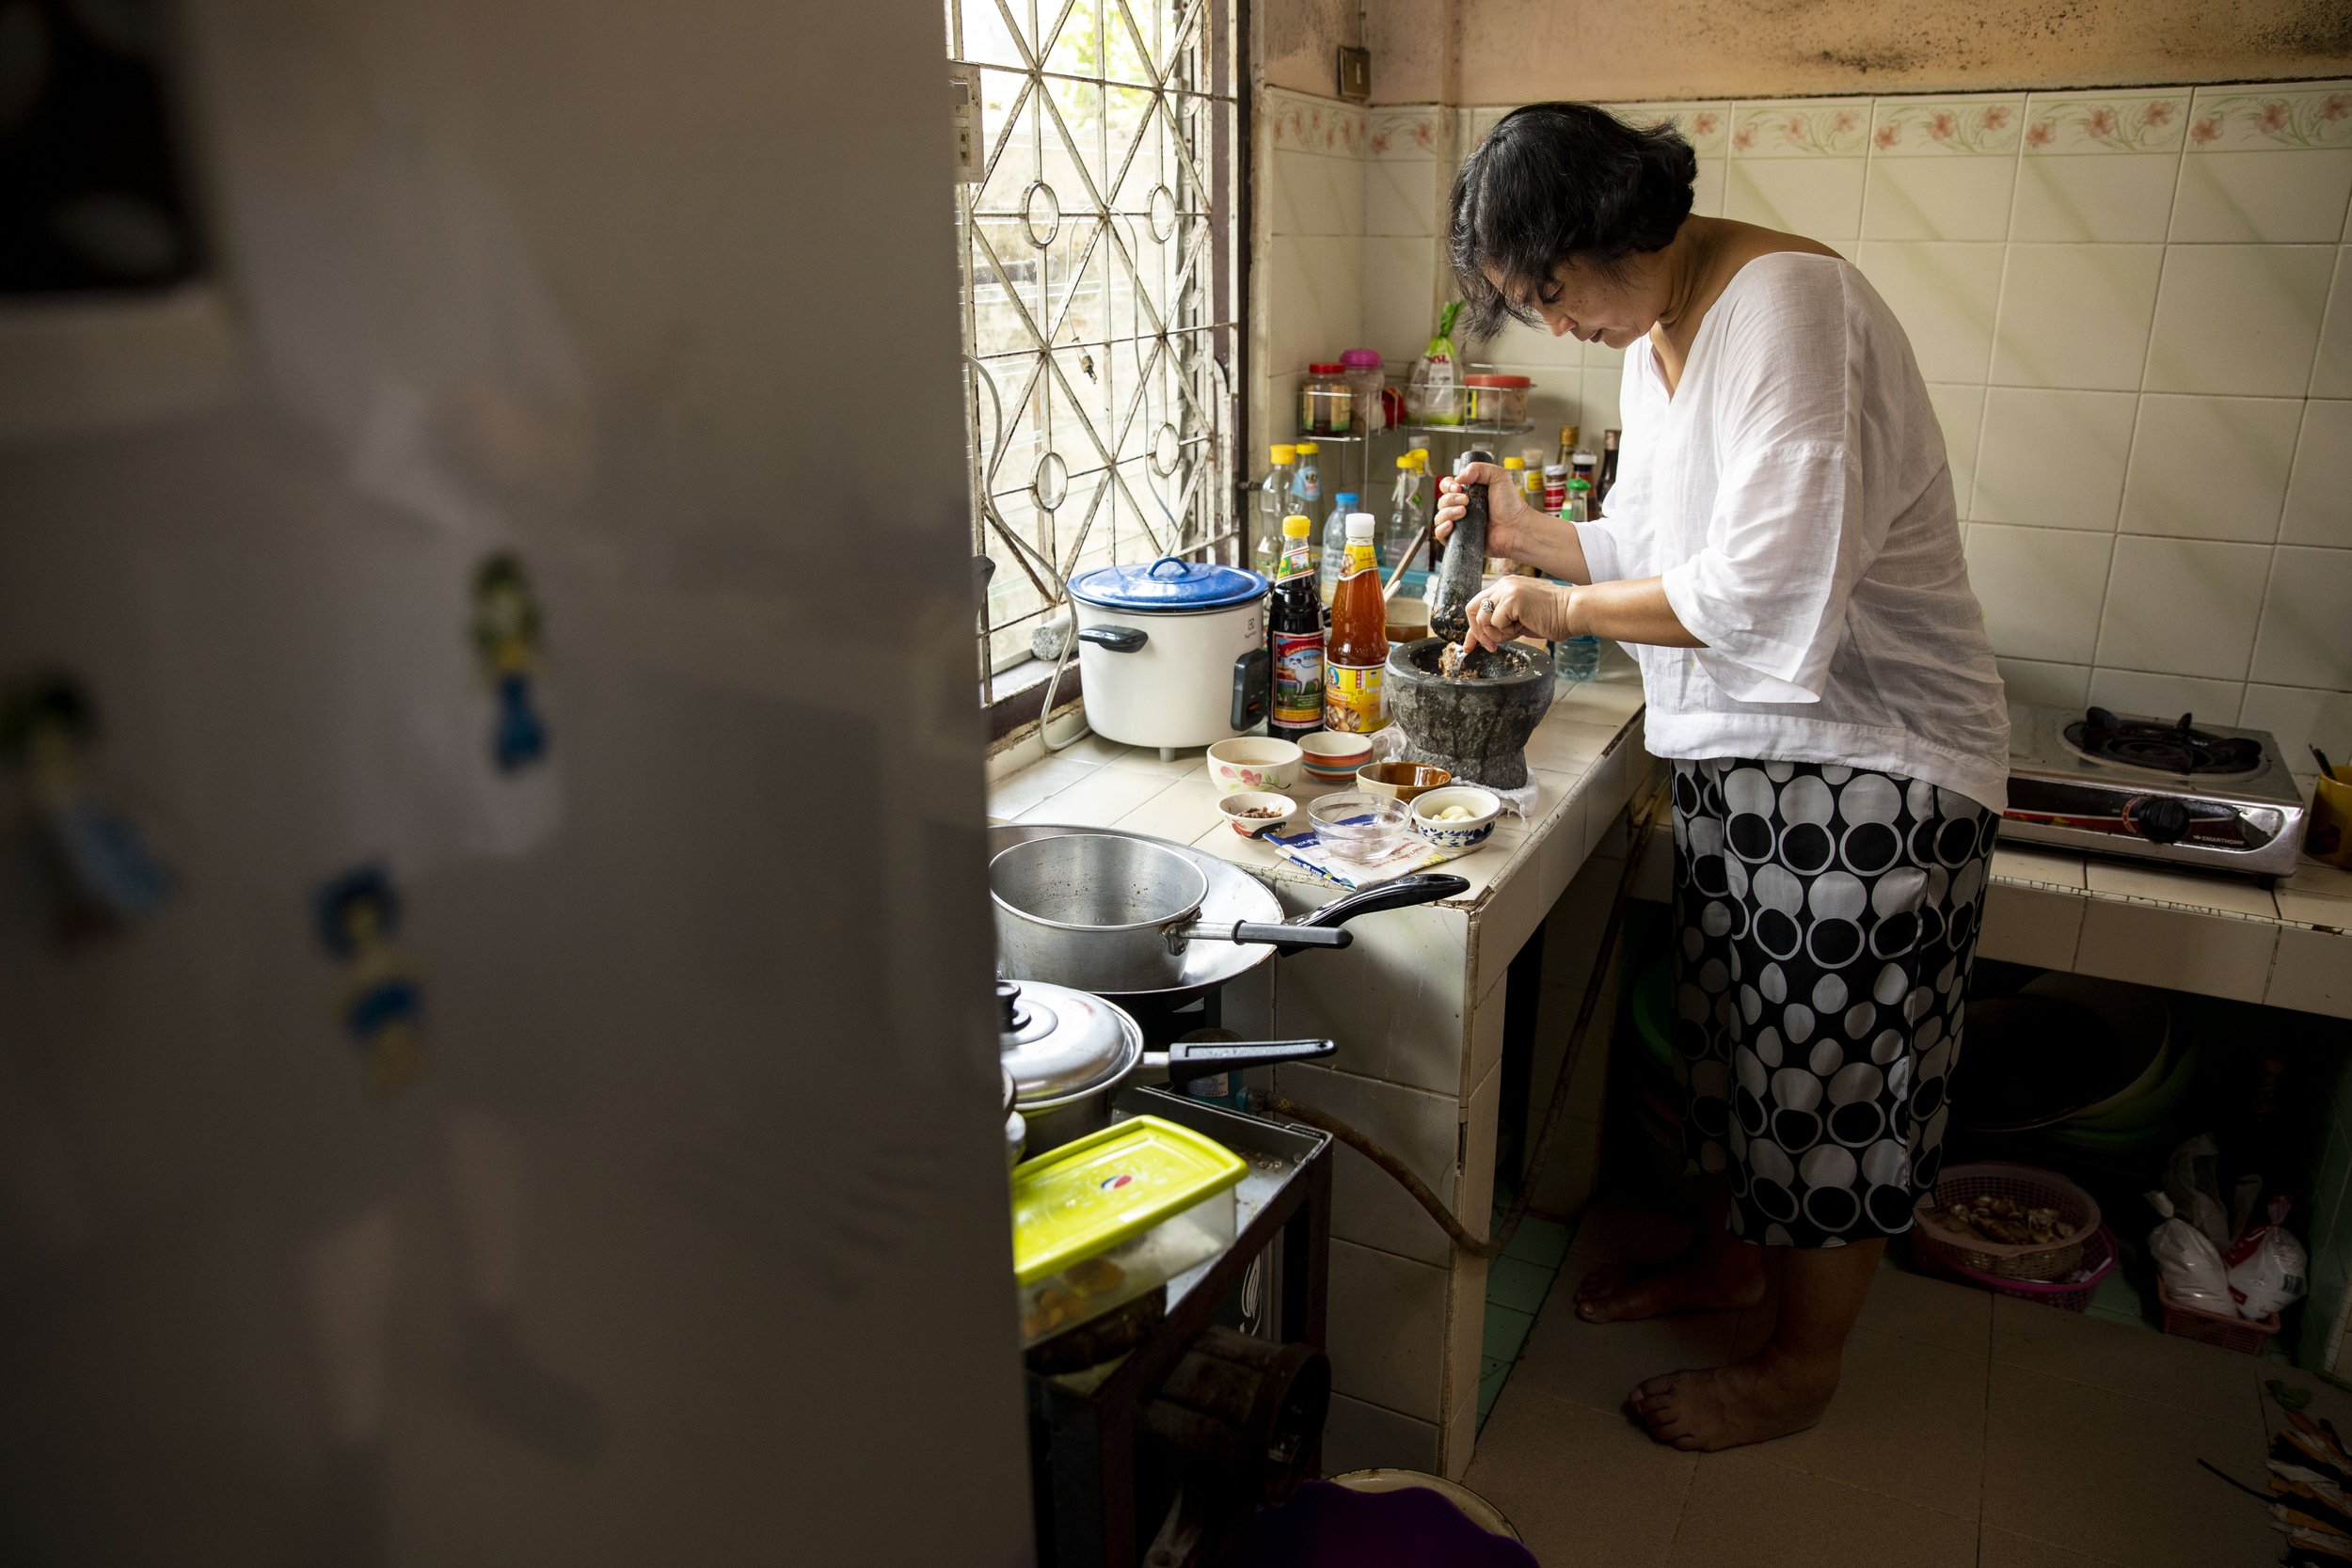  Chutatip “Nok” Suntaranon prepares a relish in her family's home in Yantakhao, Thailand on Saturday, April 16, 2022. "I went back home this time hoping to cook with my mother, but it turned out that my mother was not well enough to cook with me," No